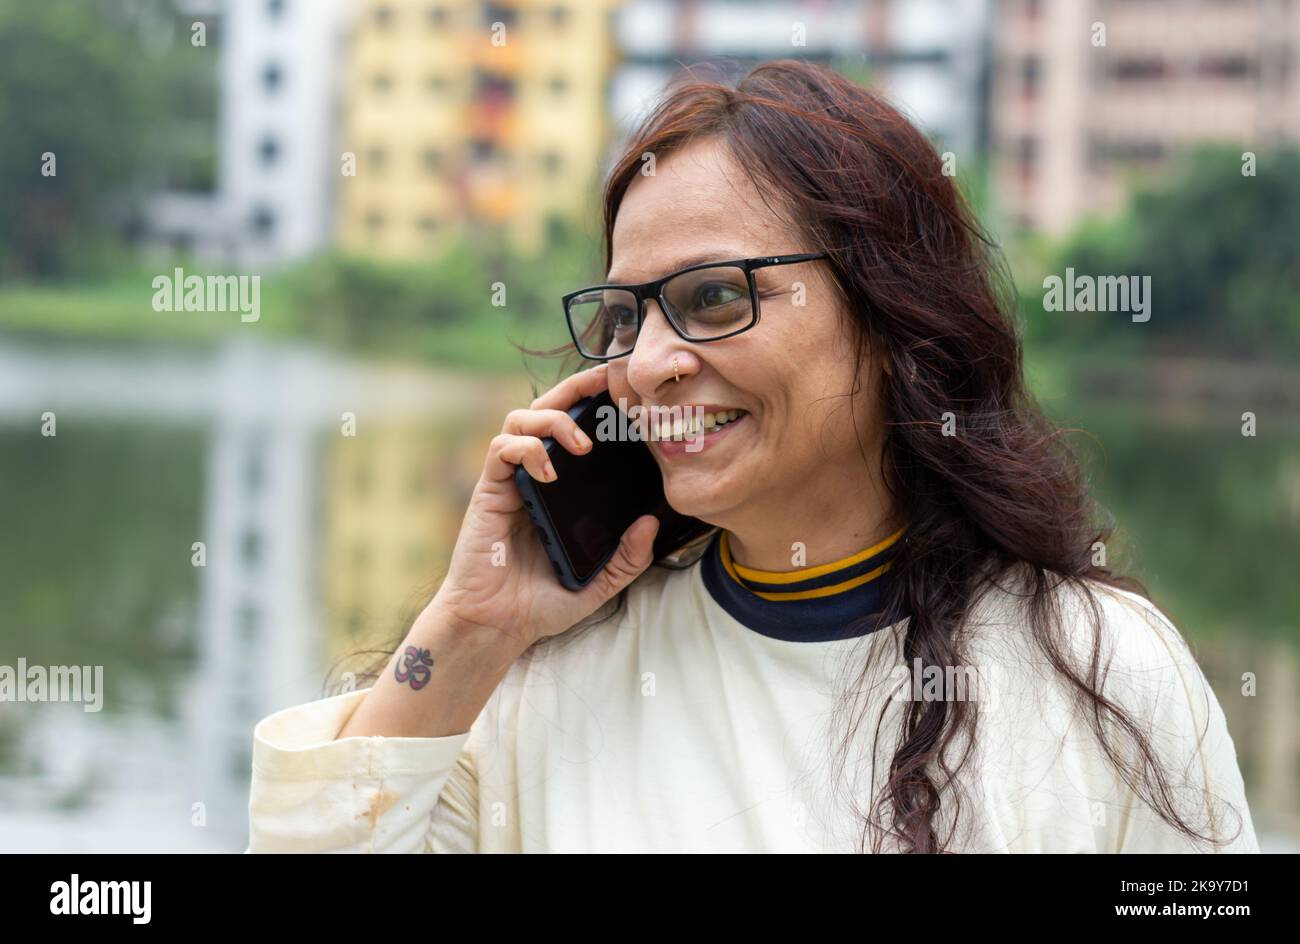 Mid Adult Smiling Woman with long brown hair Speaking on mobile phone outdoors. Closeup. She is wearing White T-shirt and specs. Front view. Head and Stock Photo